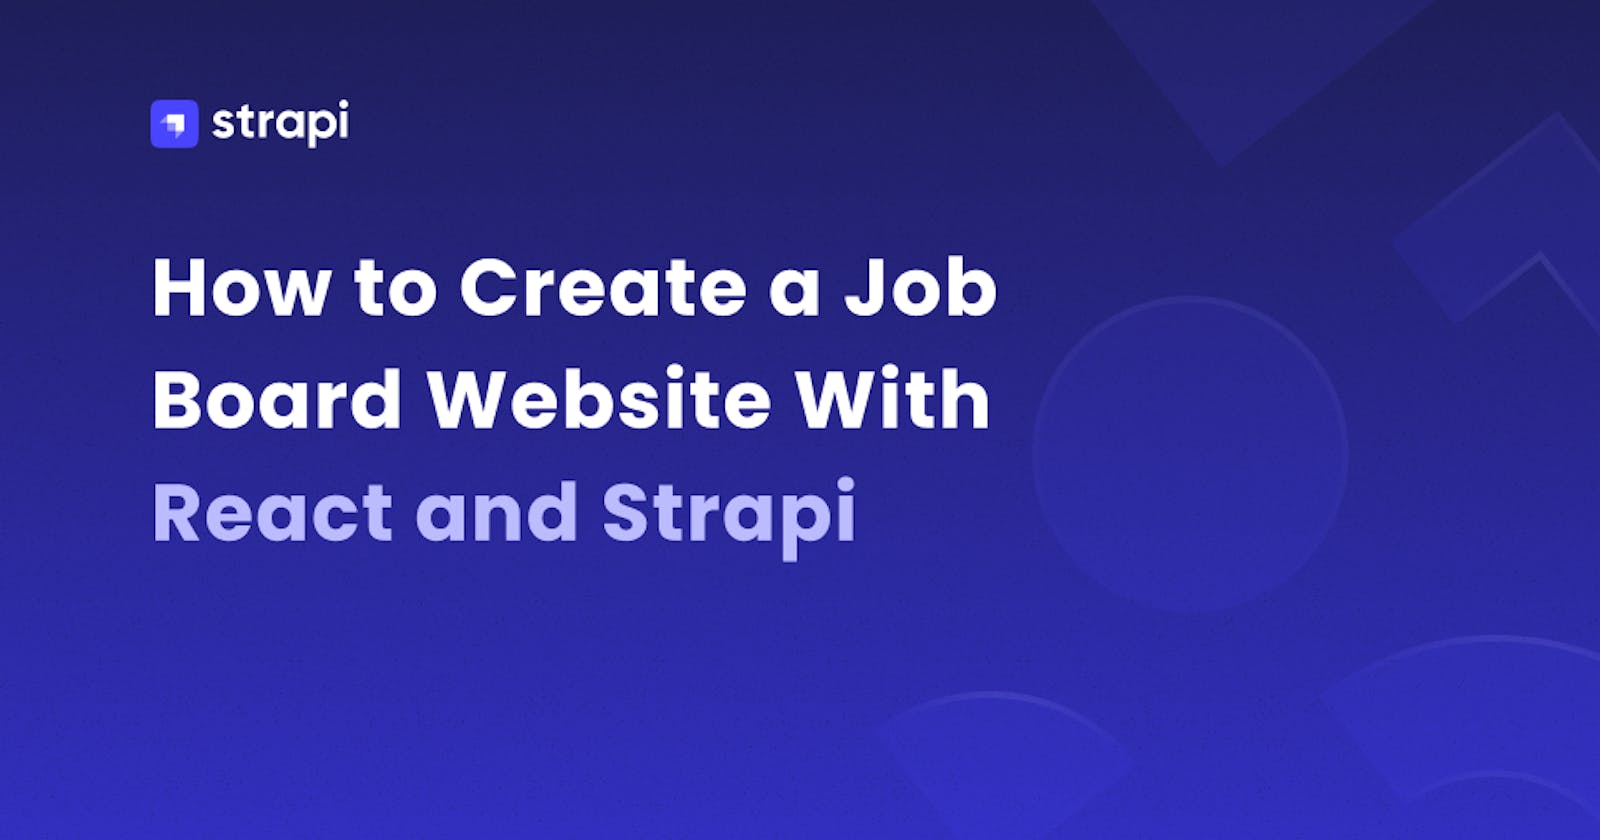 How to Create a Job Board Website With React and Strapi